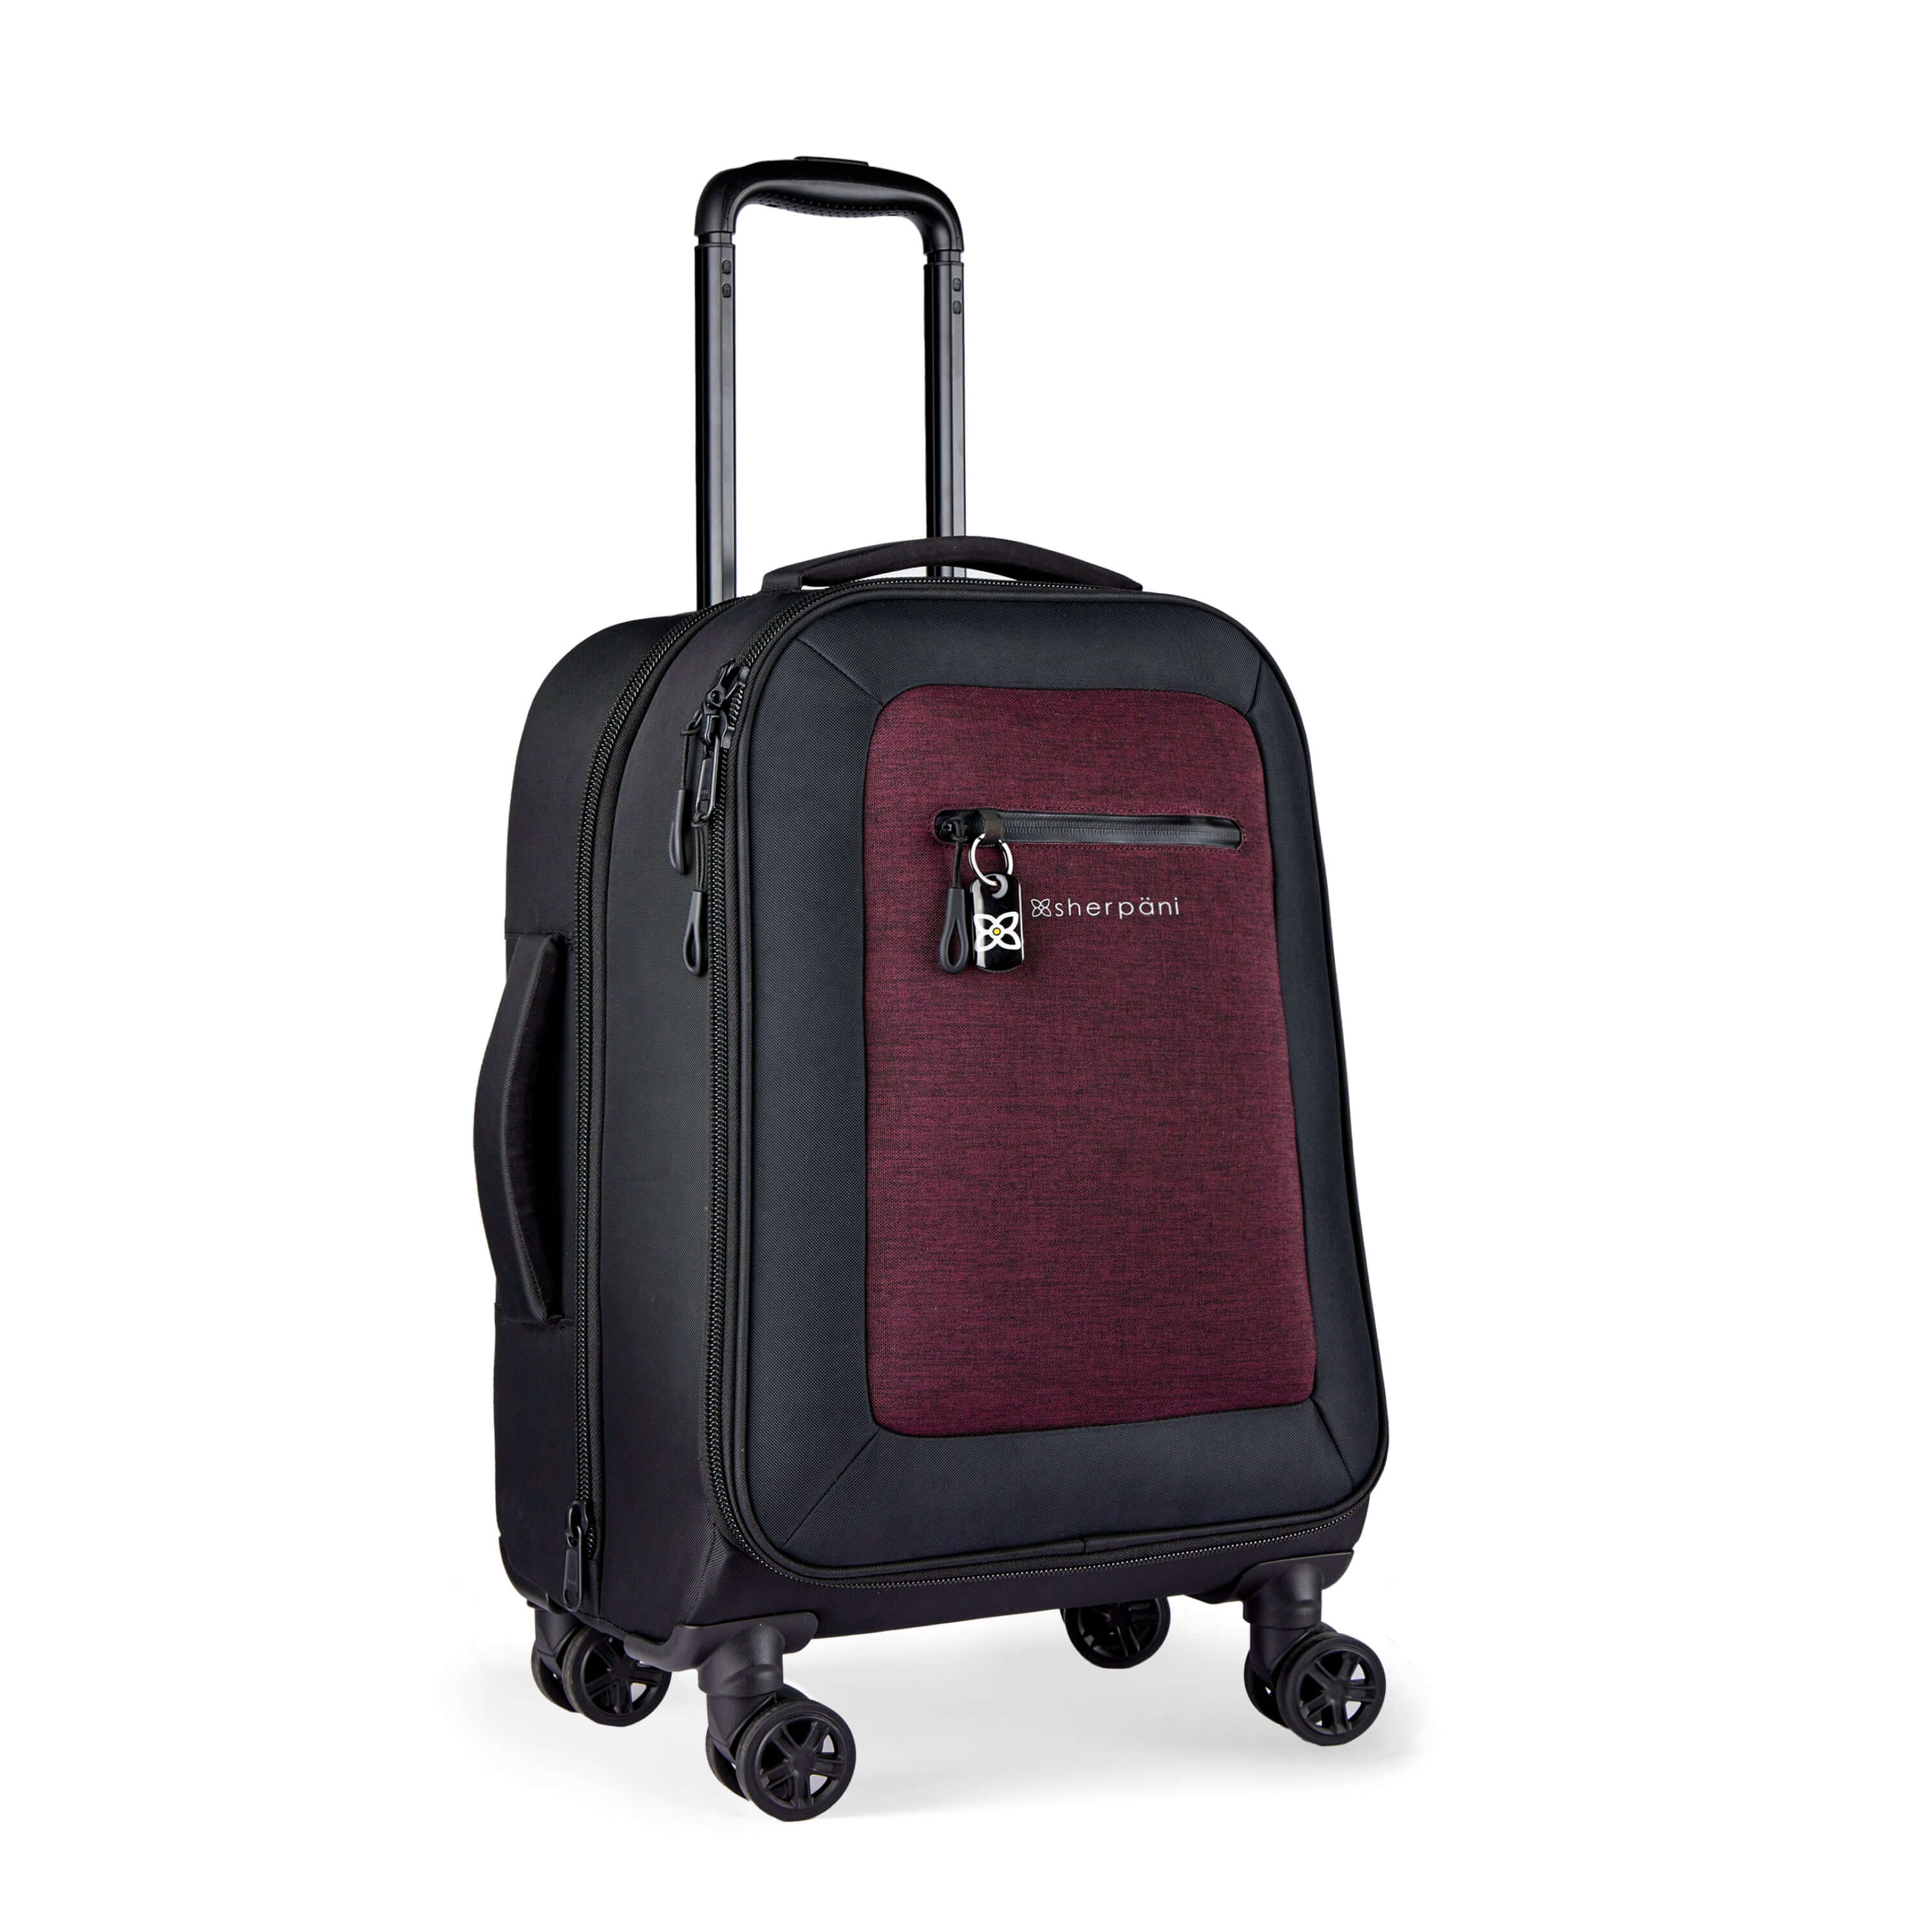 Angled front view of Sherpani's Anti-Theft luggage the Latitude in Merlot. The suitcase has a soft shell exterior made from recycled plastic bottles and features vegan leather accents in black. There is a main zipper compartment, an expansion zipper and an external pocket on the front with a locking zipper and a ReturnMe tag. On the top of the suitcase sits a retractable luggage handle. On the side sits an easy-access handle. At the bottom are four 360-degree spinner wheels for smooth rolling.#color_merlot